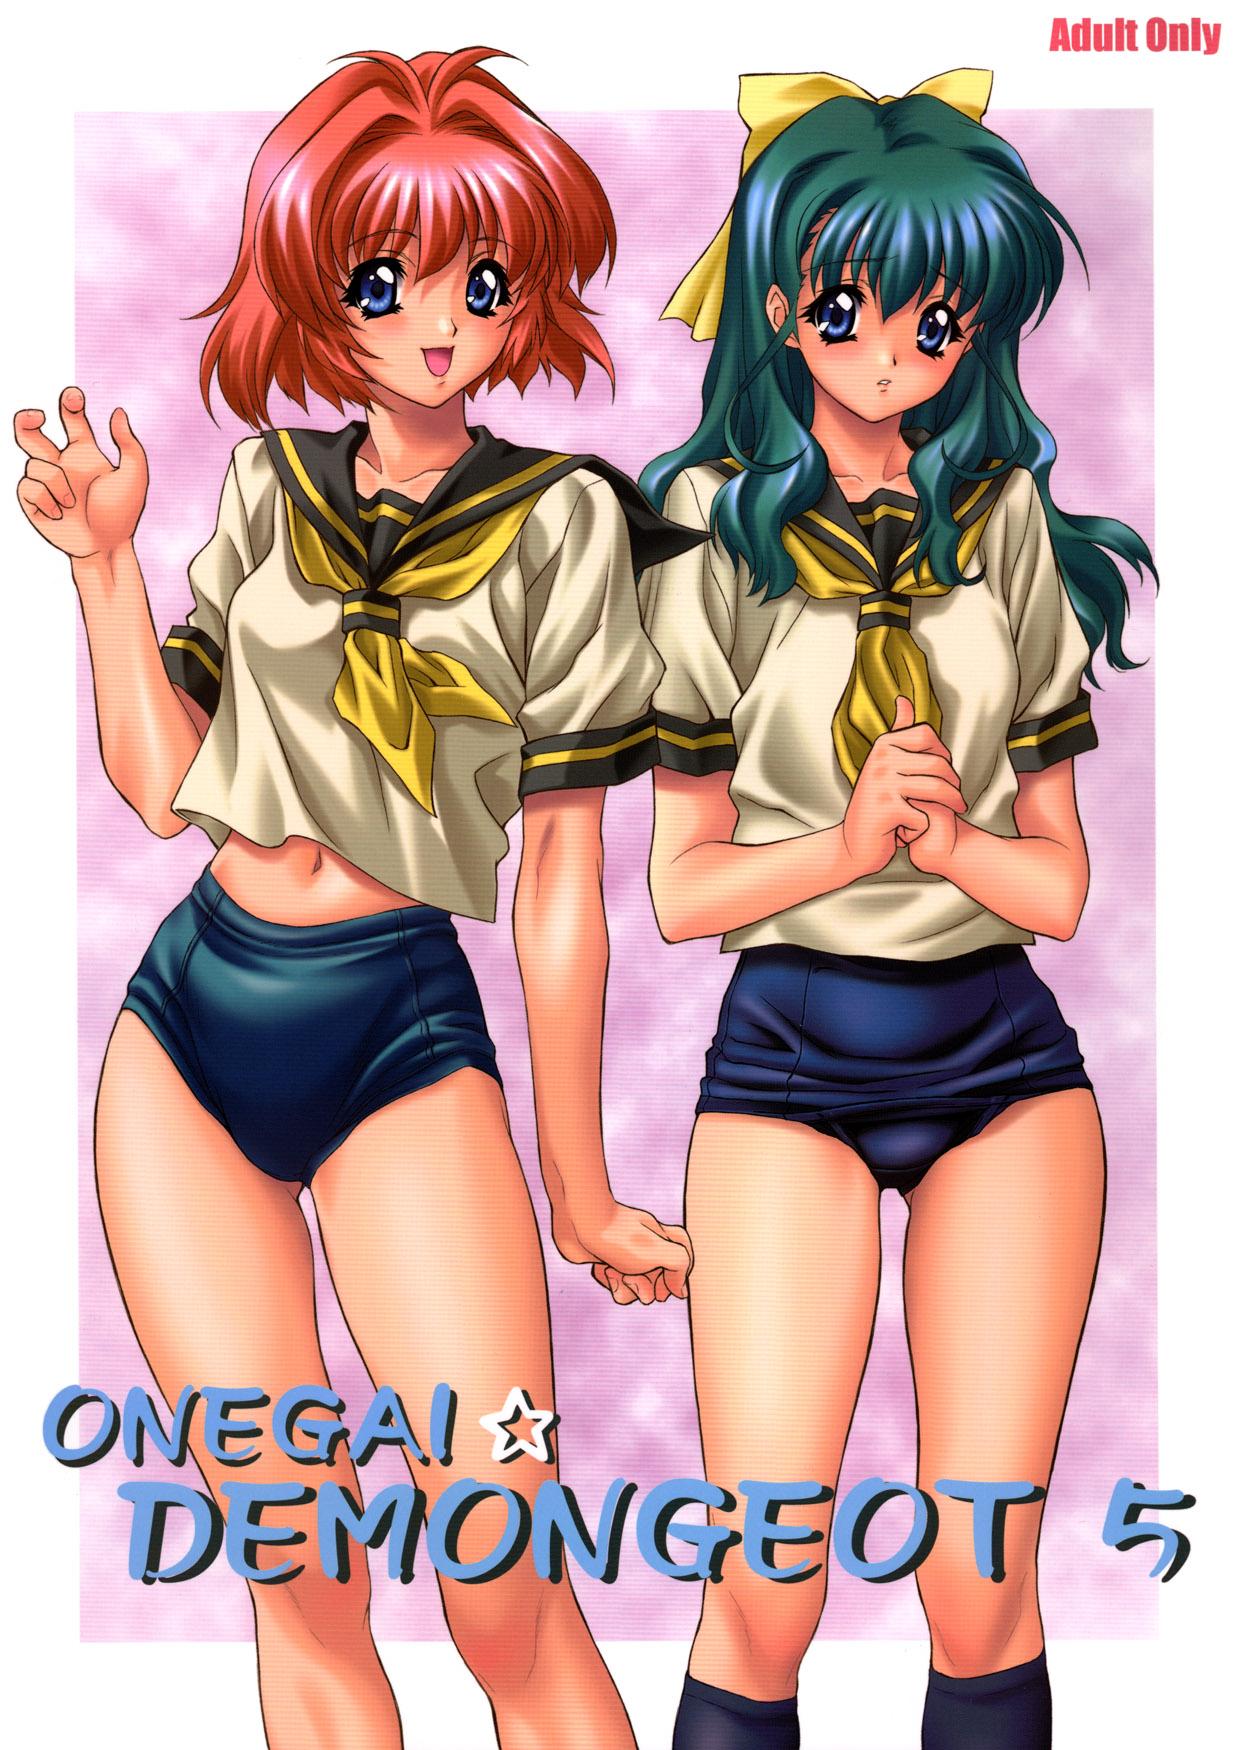 Uncensored Demongeot 5 - Onegai twins Gaygroup - Picture 1